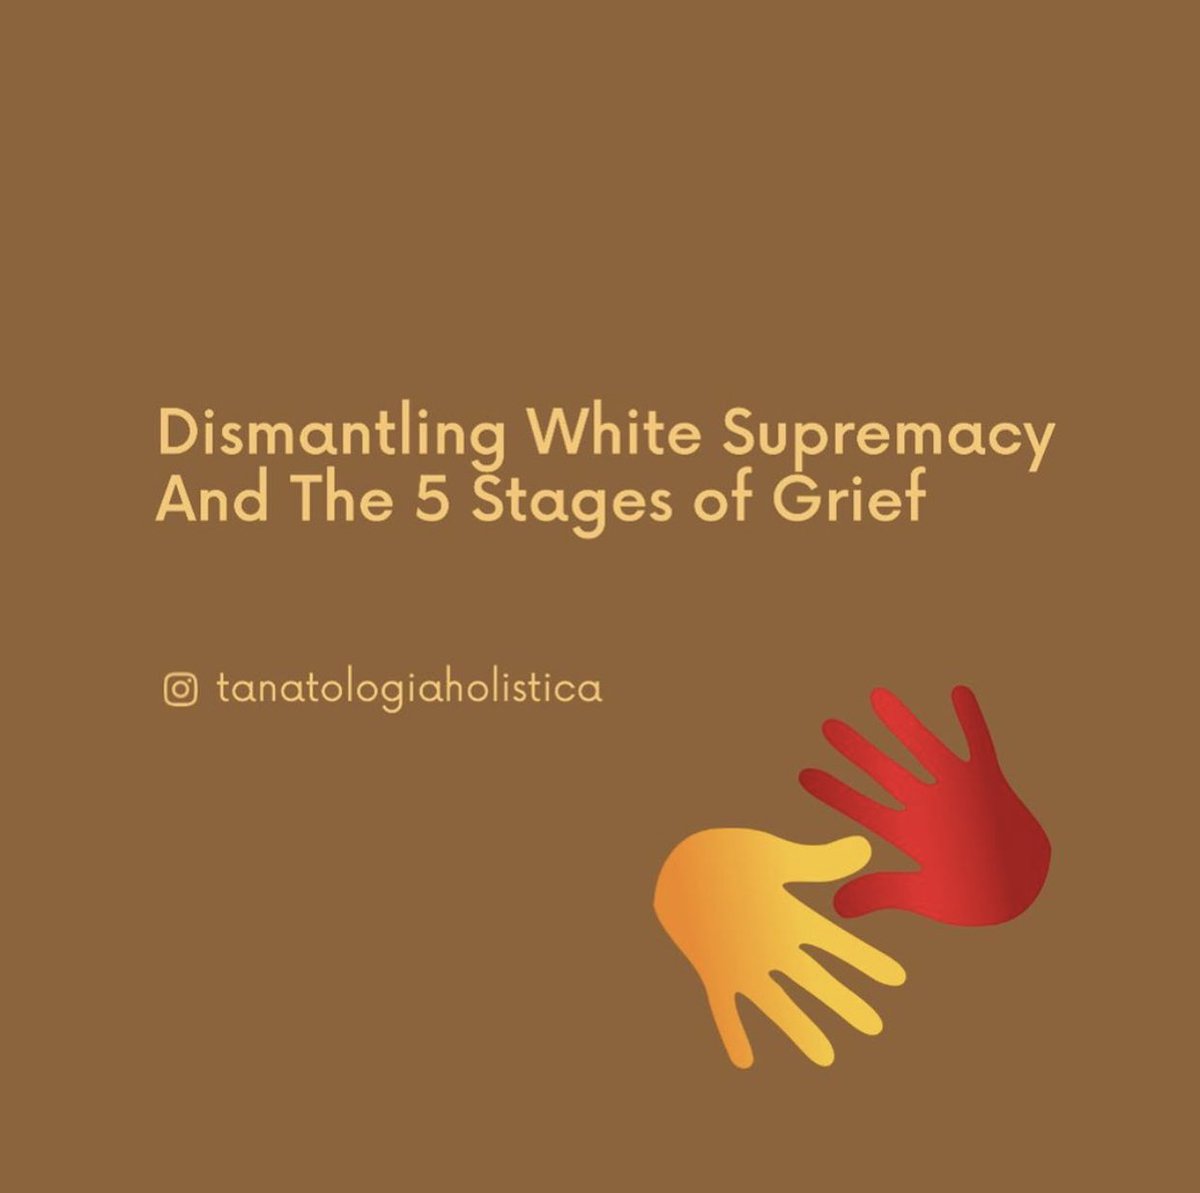 Dismantling white supremacy REQUIRES whiteness to better manage your grief when you finally realize that you’ve been complicit in maintaining the status quo which is RACISMKnowledge is power and your ignorance is no longer an excuse for causing harm